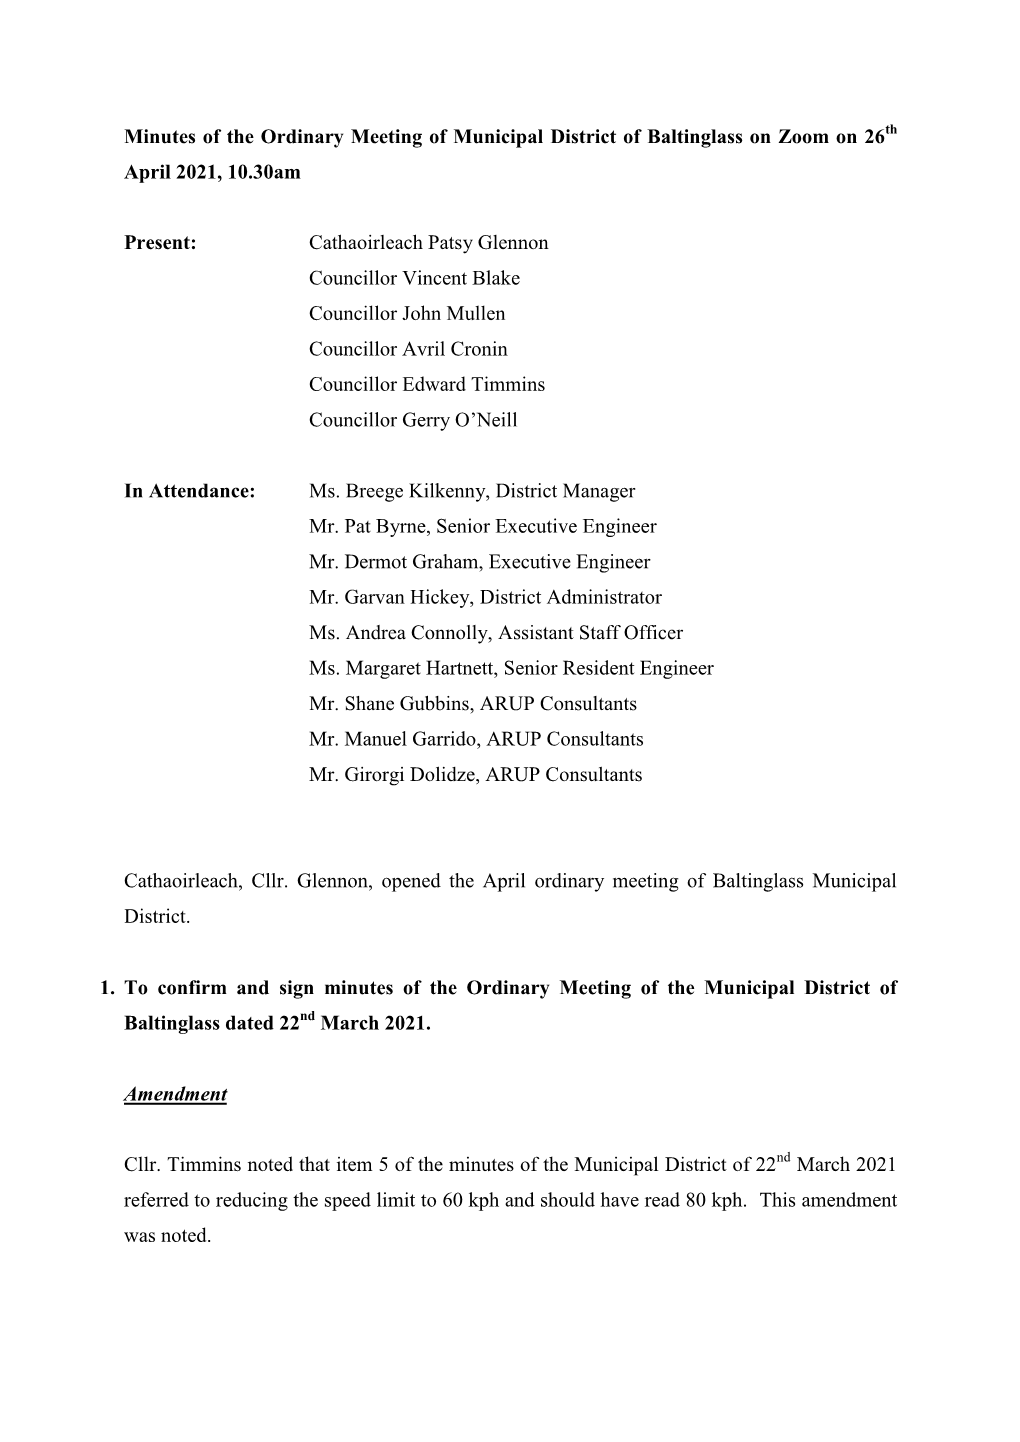 Minutes of the Ordinary Meeting of Municipal District of Baltinglass on Zoom on 26 April 2021, 10.30Am Present: Cathaoirleach Pa